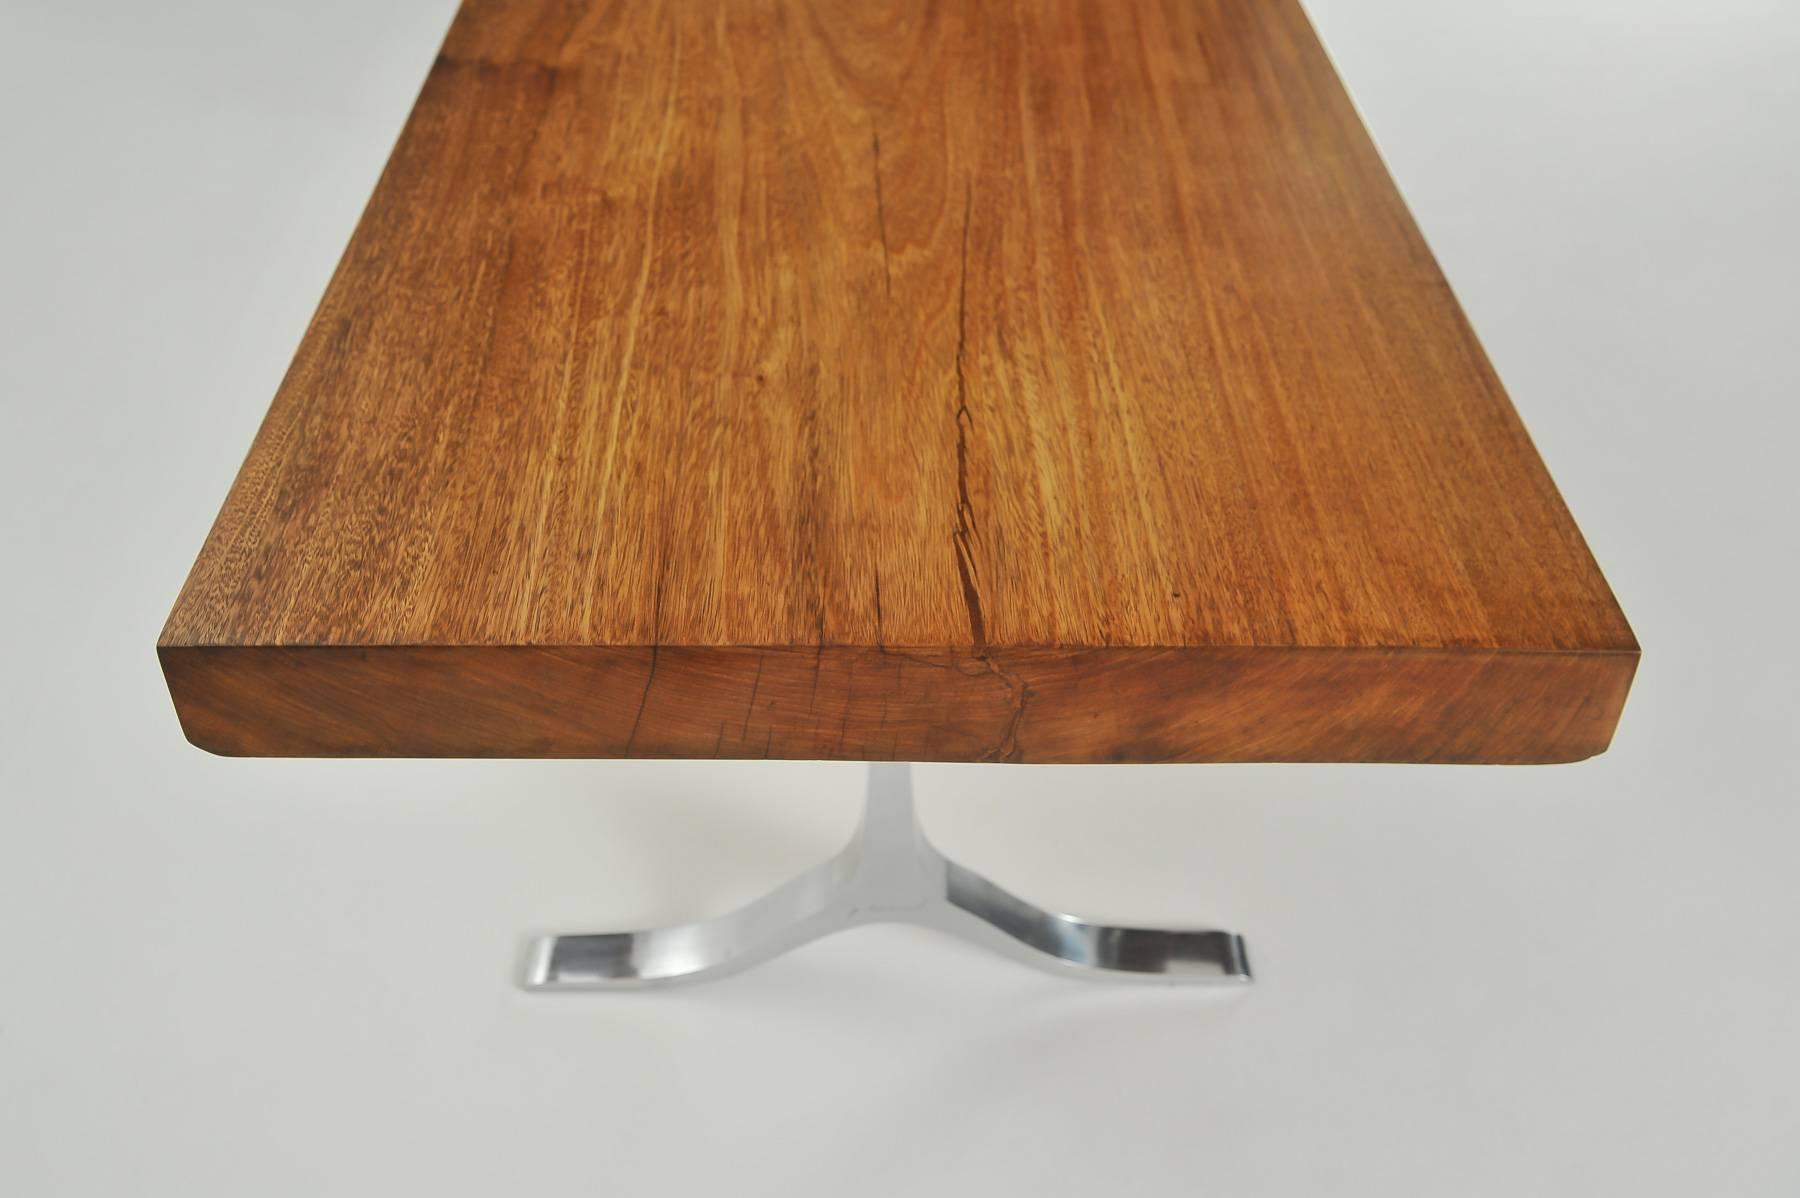 We created this table for a French client, who was looking for a hyper-sleek table for his livingroom. It should look like a console, but desk-height. He wanted a very neutral base, so focus would fall on the wood. He loved.

Model: